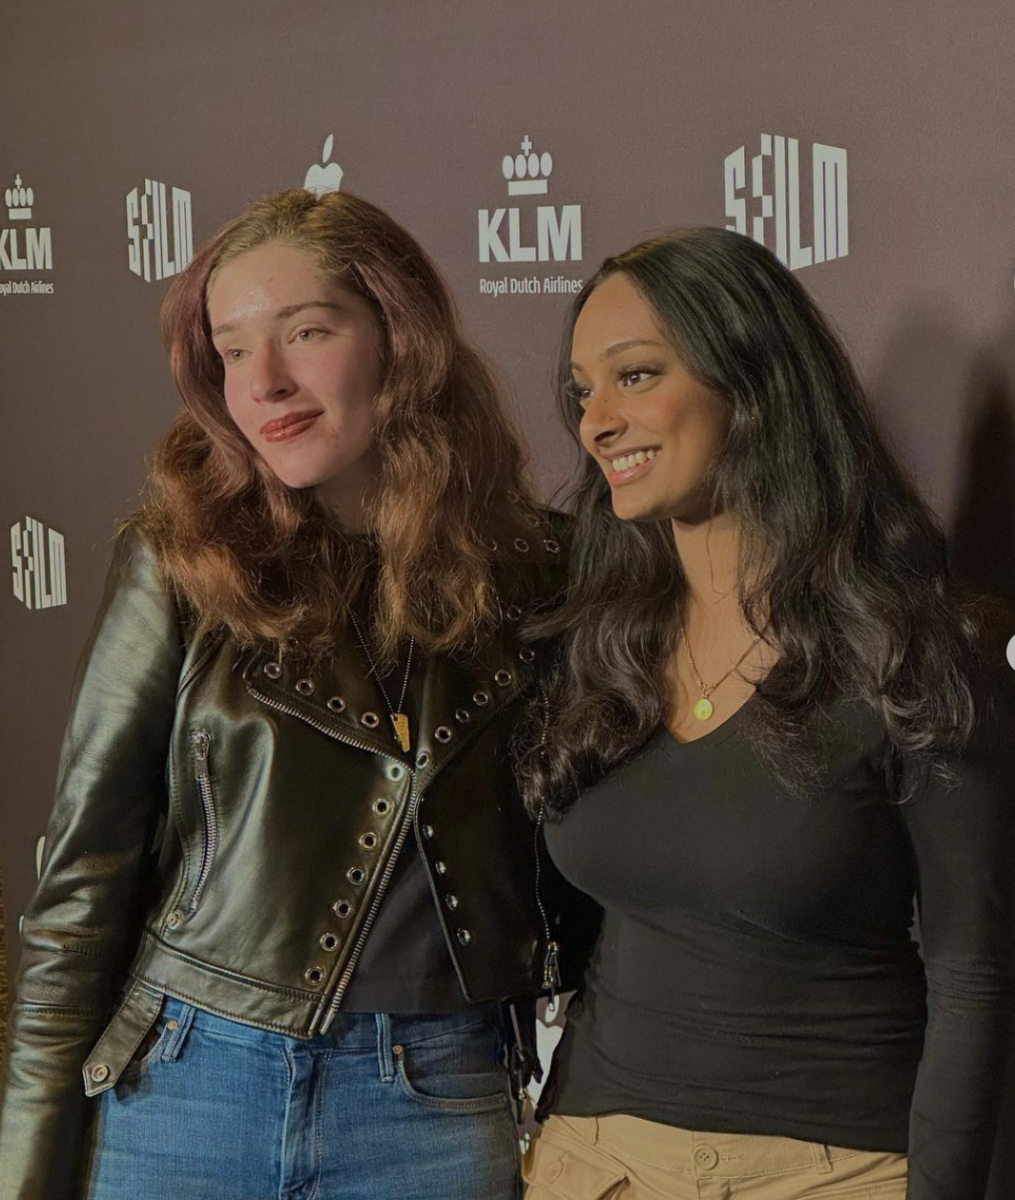 Keertana Sreekumar, right, and Athena Zarath smile for photos at the premier of “Growing up with Memory Loss”, a short that Sreekumar directed for SFFILM last year.